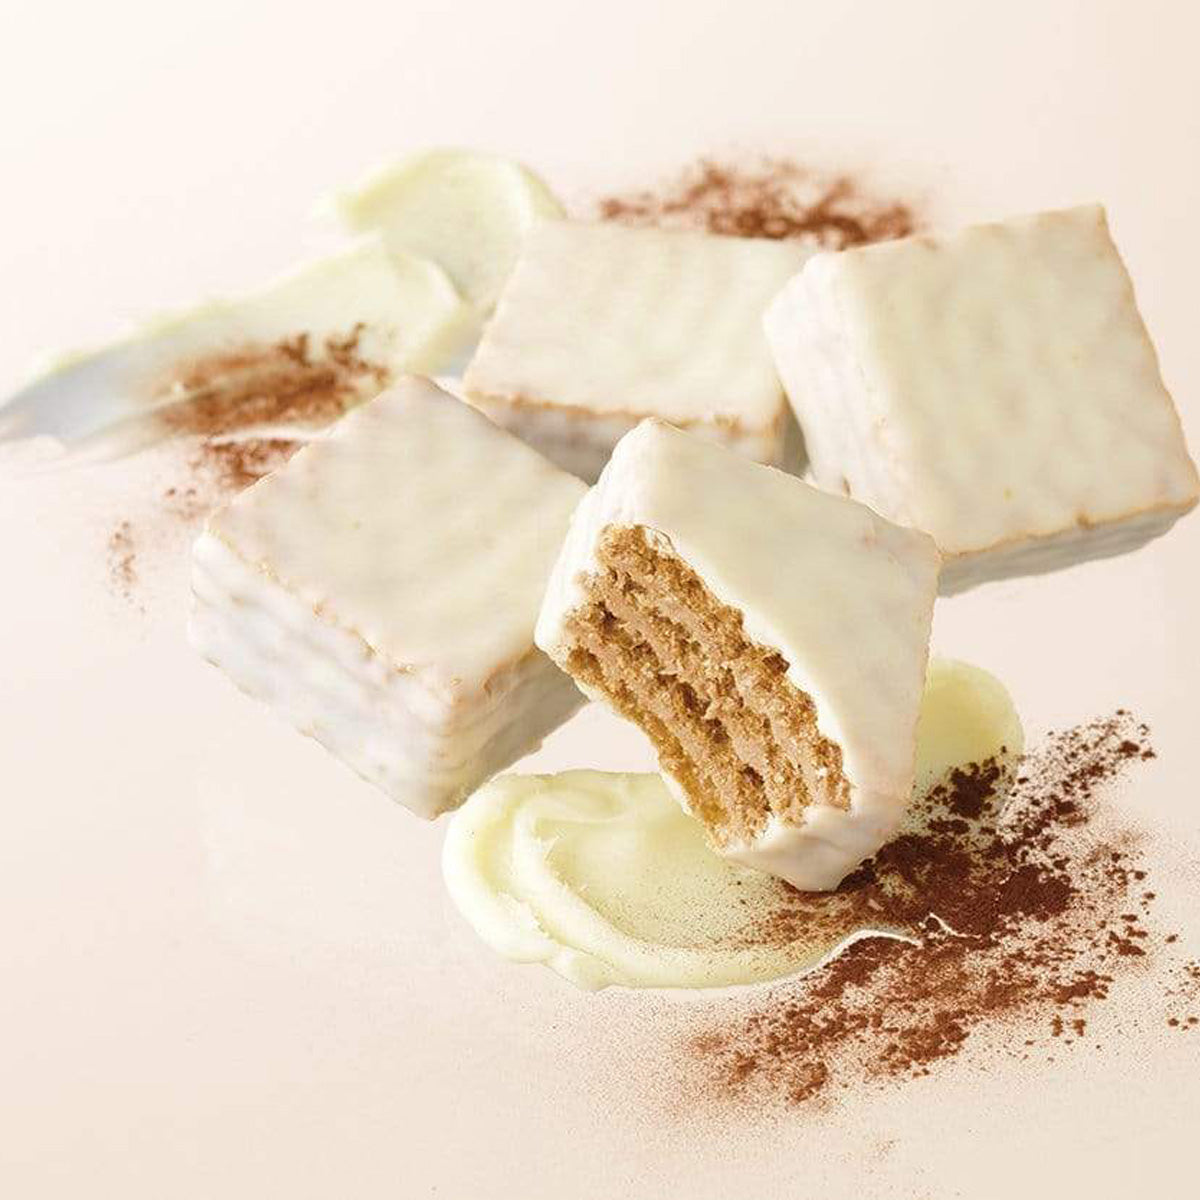 ROYCE' Chocolate - Chocolate Wafers "Tiramisu Cream" - Image shows white chocolate wafers. Background is in light brown with accents of white whipped cream and brown chocolate powder.